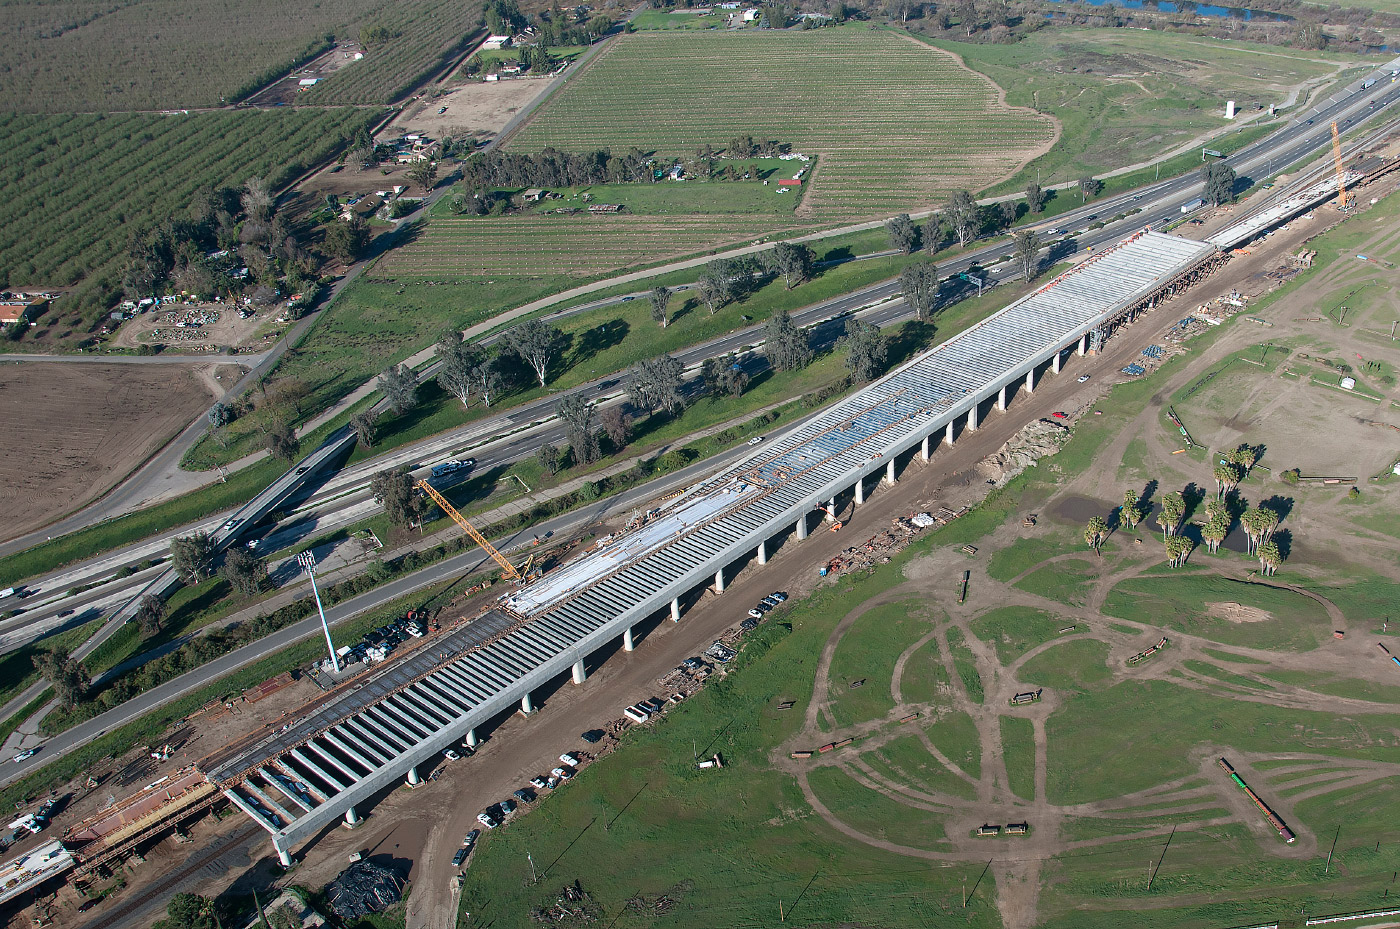 a section of the San Joaquin River Viaduct & Pergola in Fresno